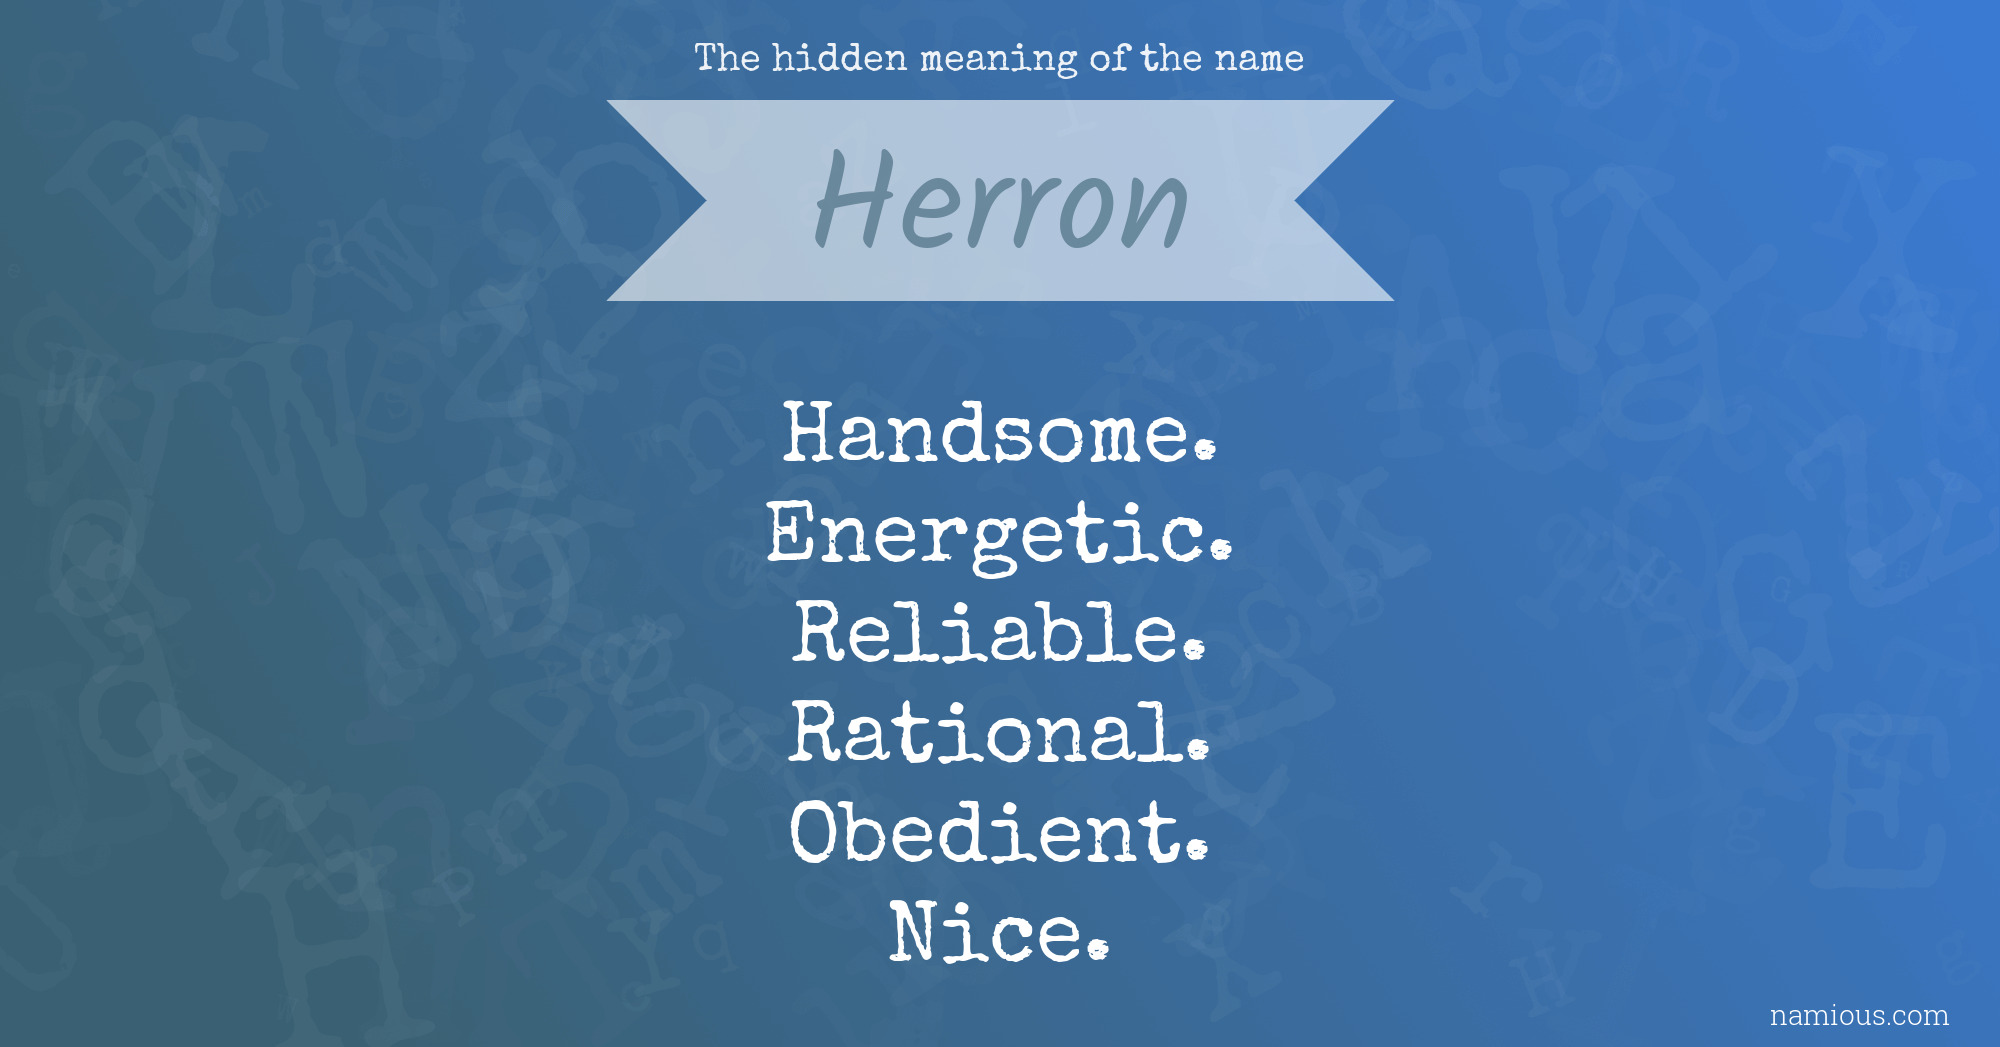 The hidden meaning of the name Herron